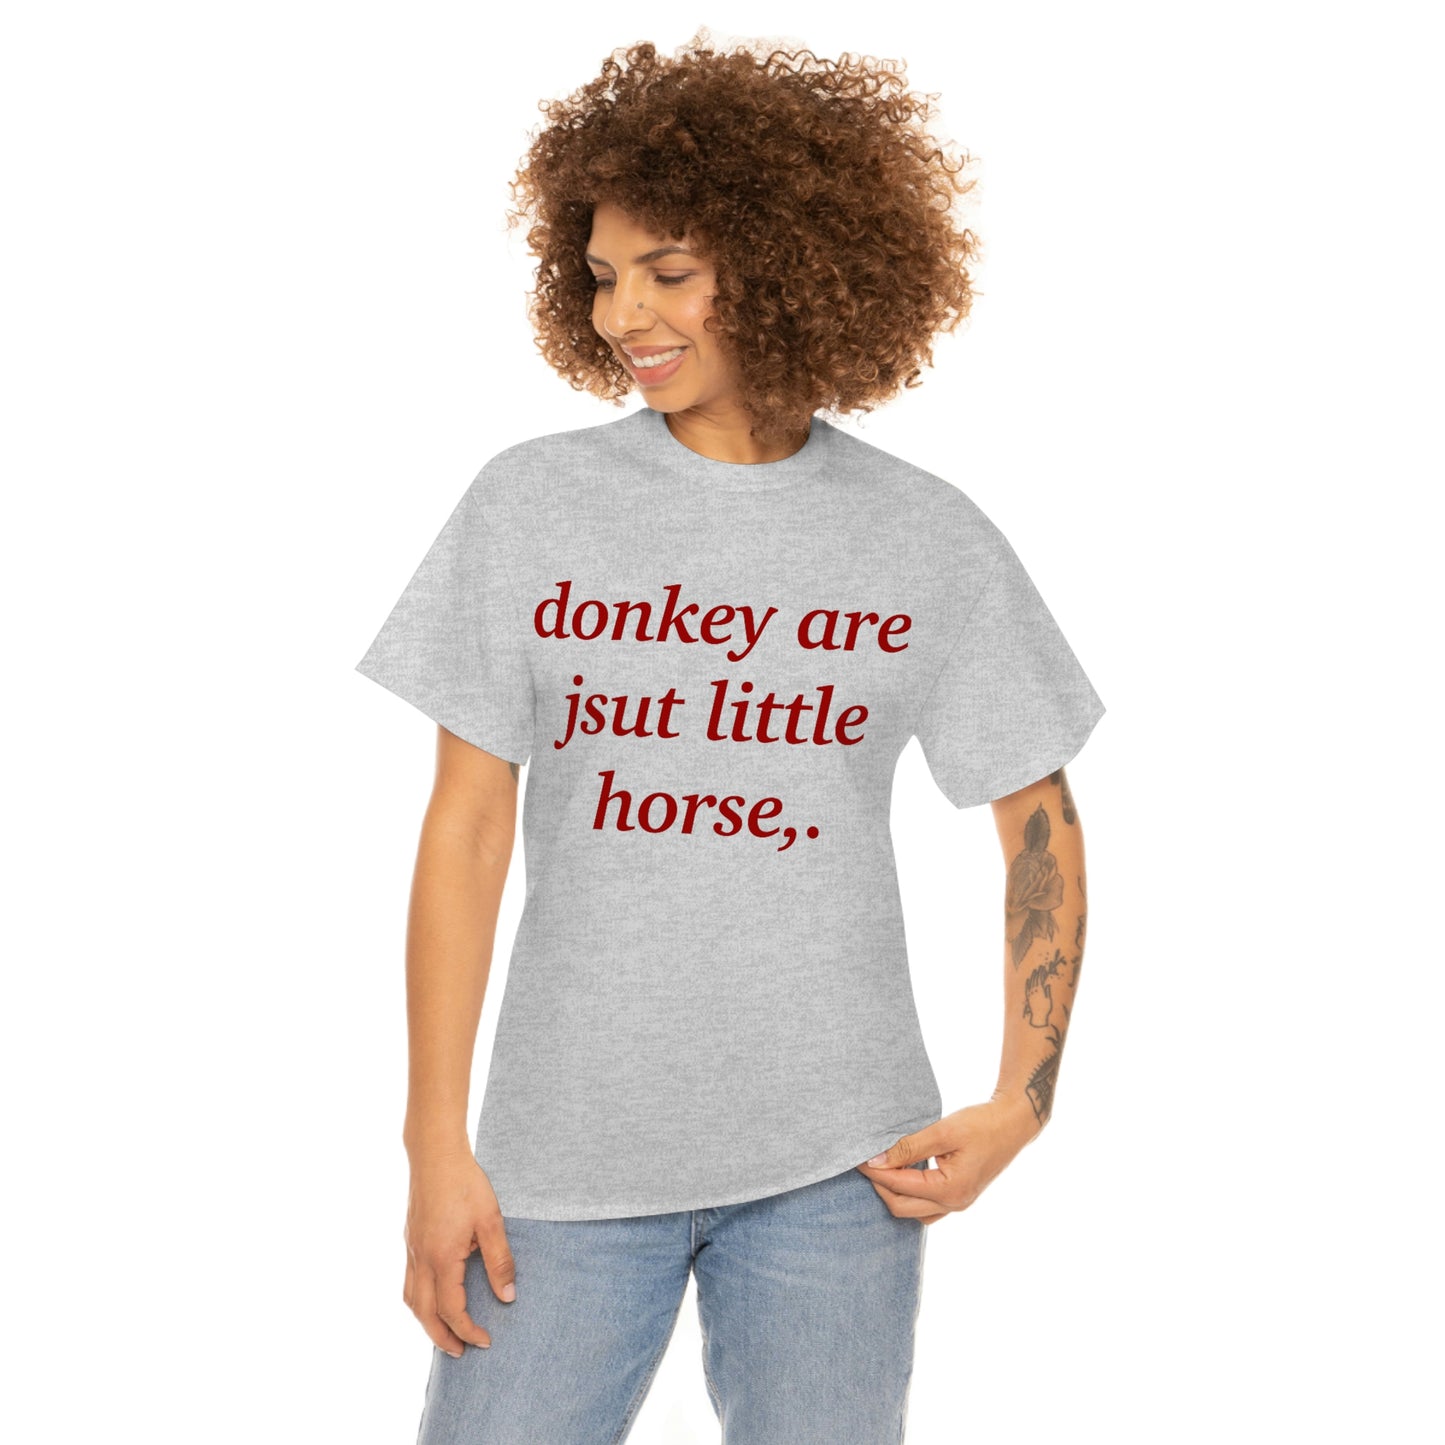 Donkey are just little horse.